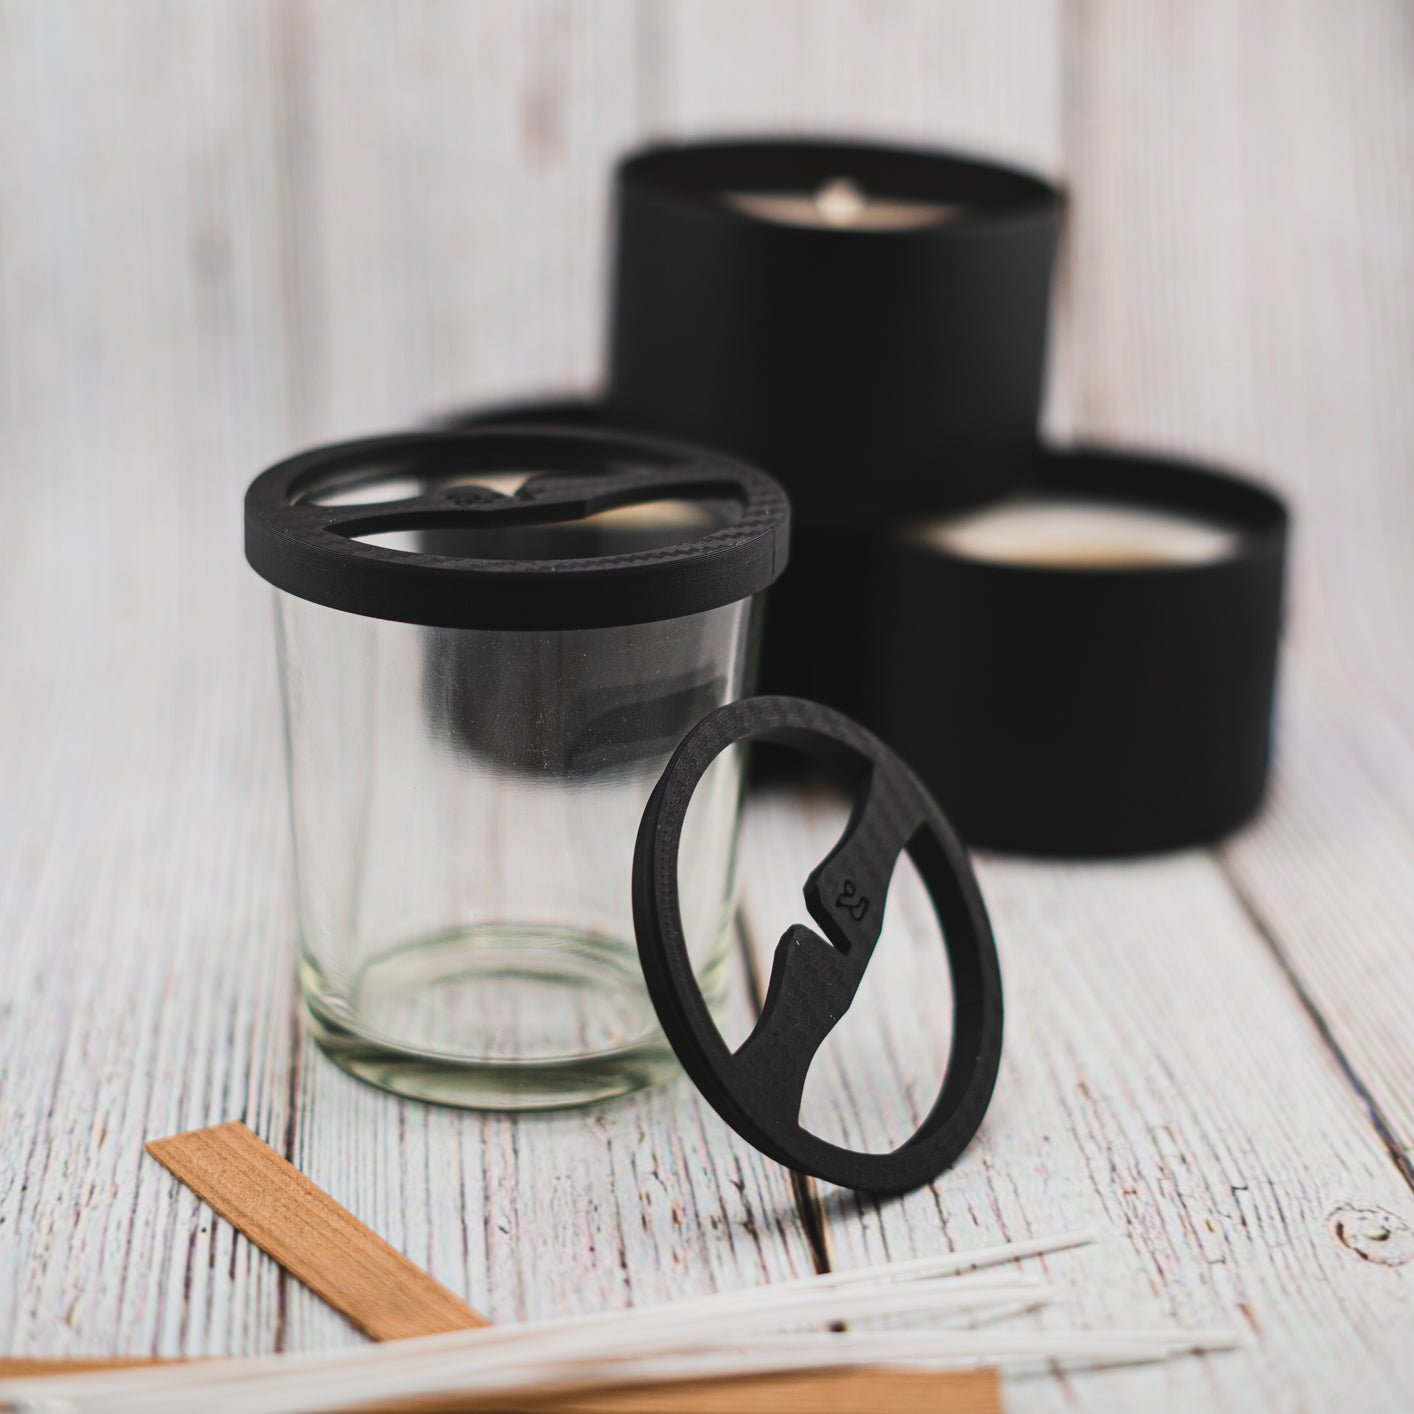 Candle Wick Holders – Bespoke Candle Tools